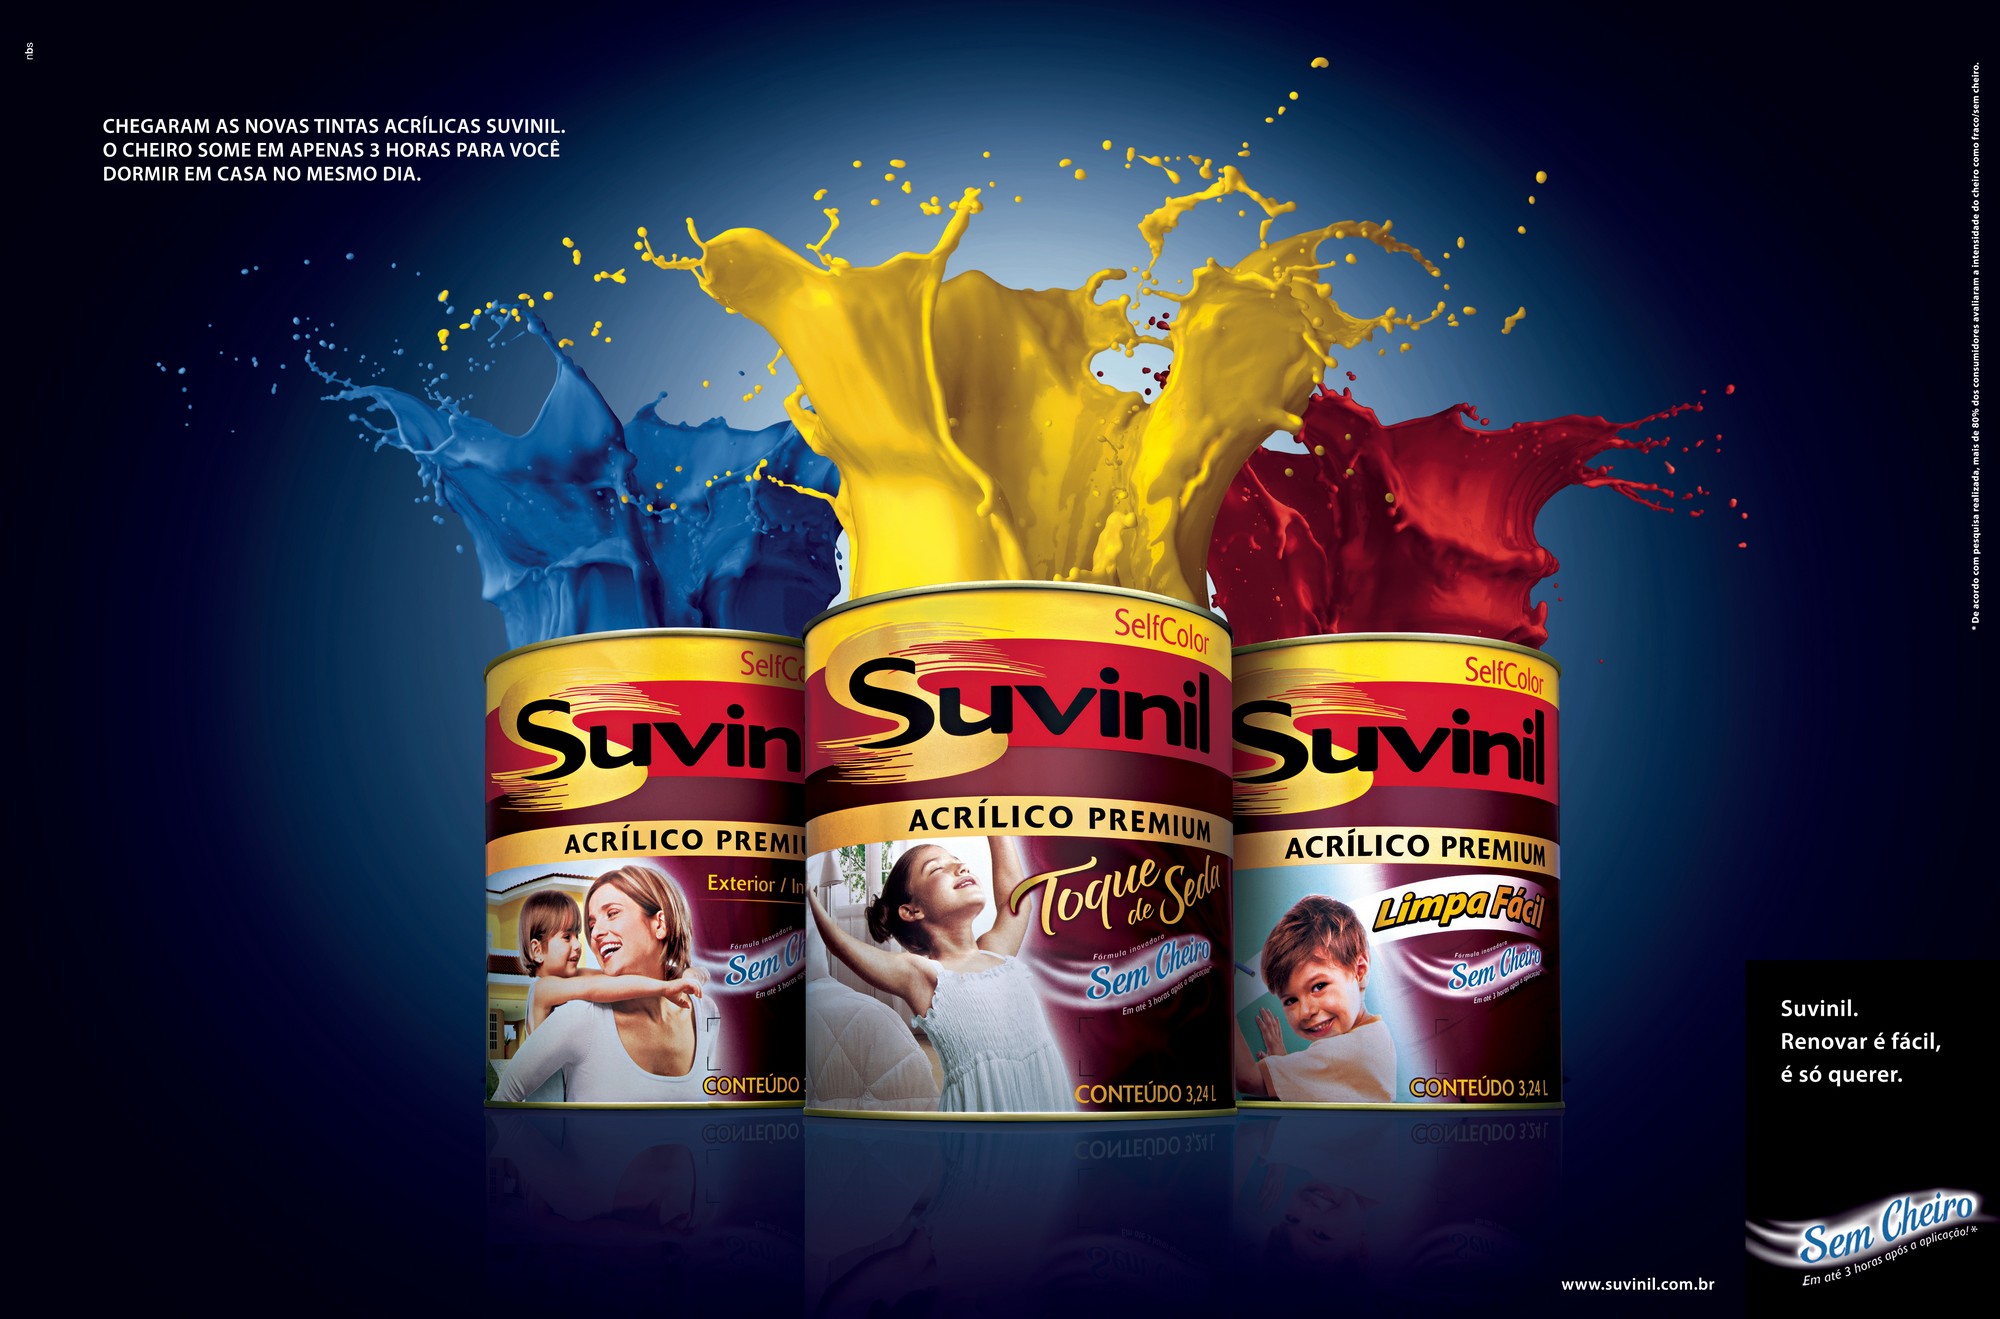 Client: Suvinil – Agency: NBS – A.D.: Darcy Fonseca